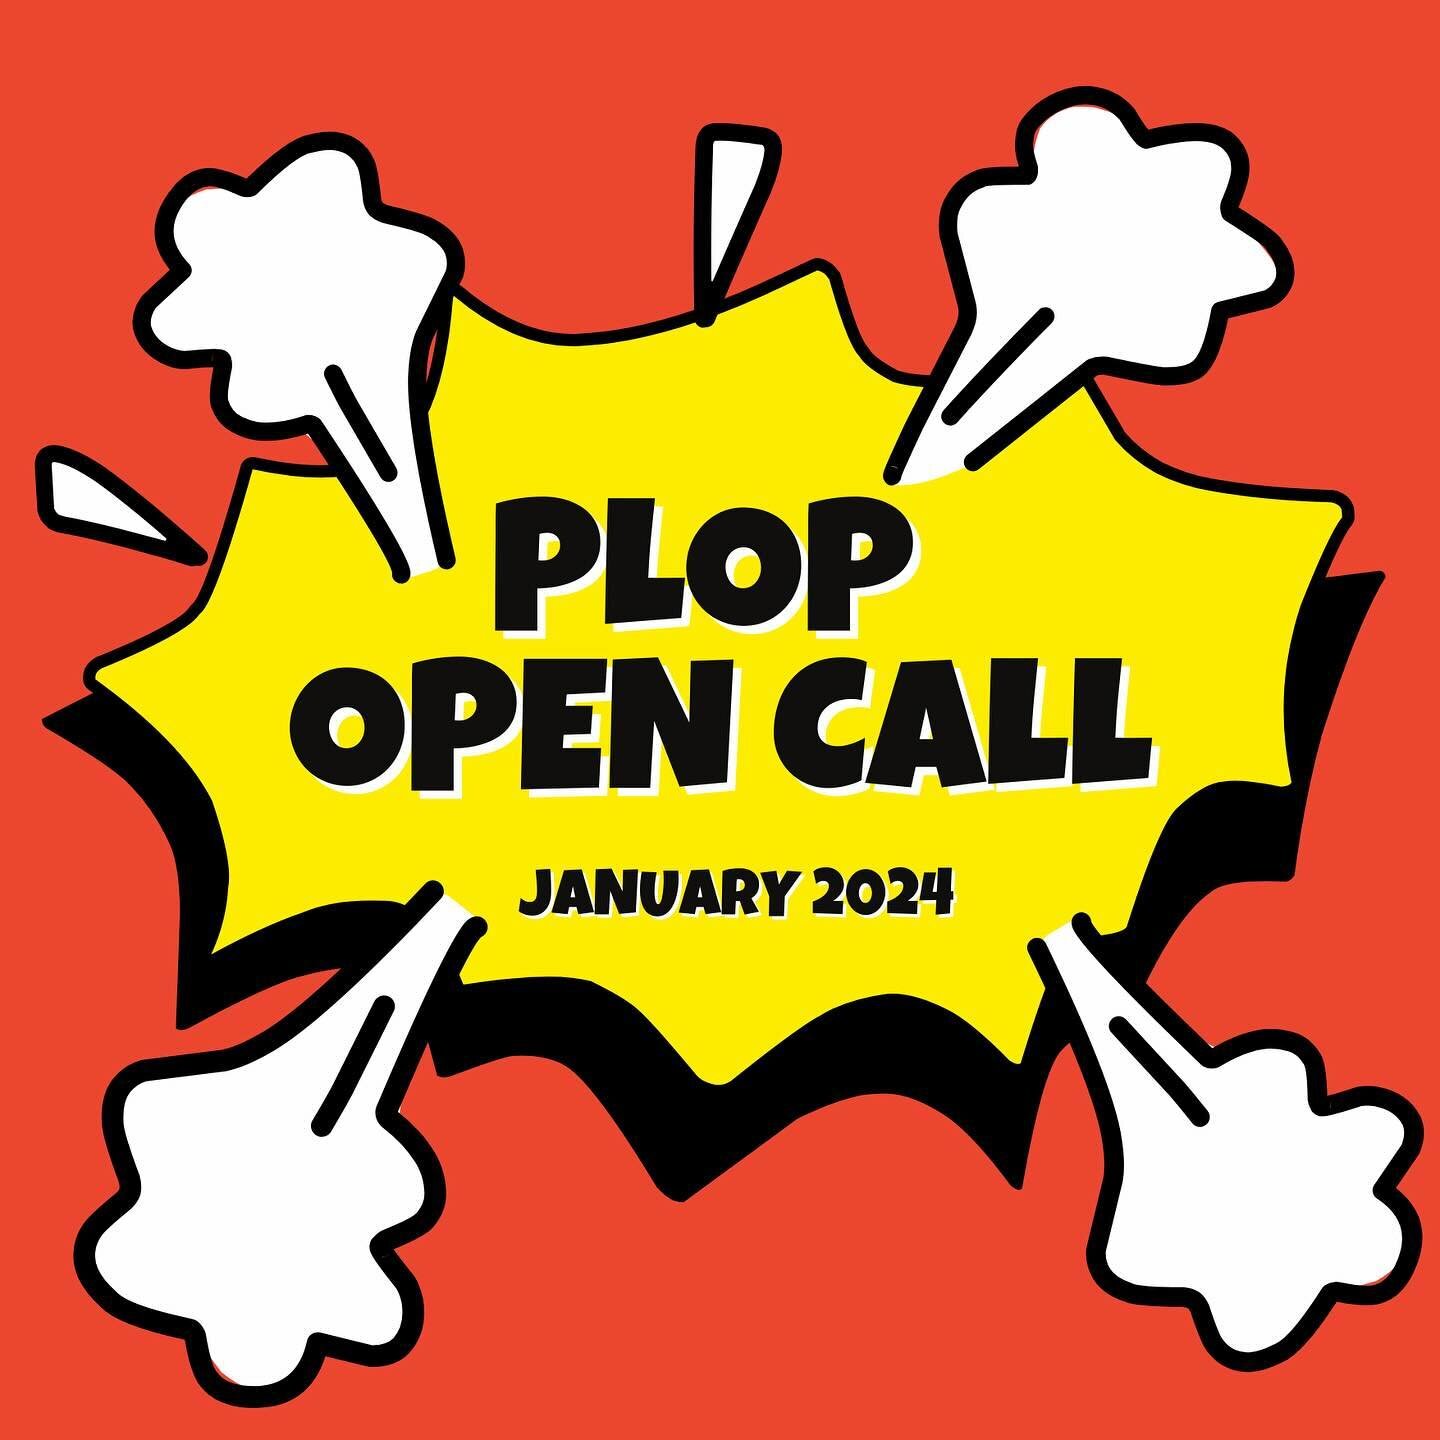 ‼️ OPEN CALL ☎️ 

We've had a slot open up in January for an artist collaboration / duo! 

How to apply:
1️⃣ Tell us about yourselves (100 words each) and why you want to work together on this opportunity (100 words).
2️⃣ List 5 London artists you wa